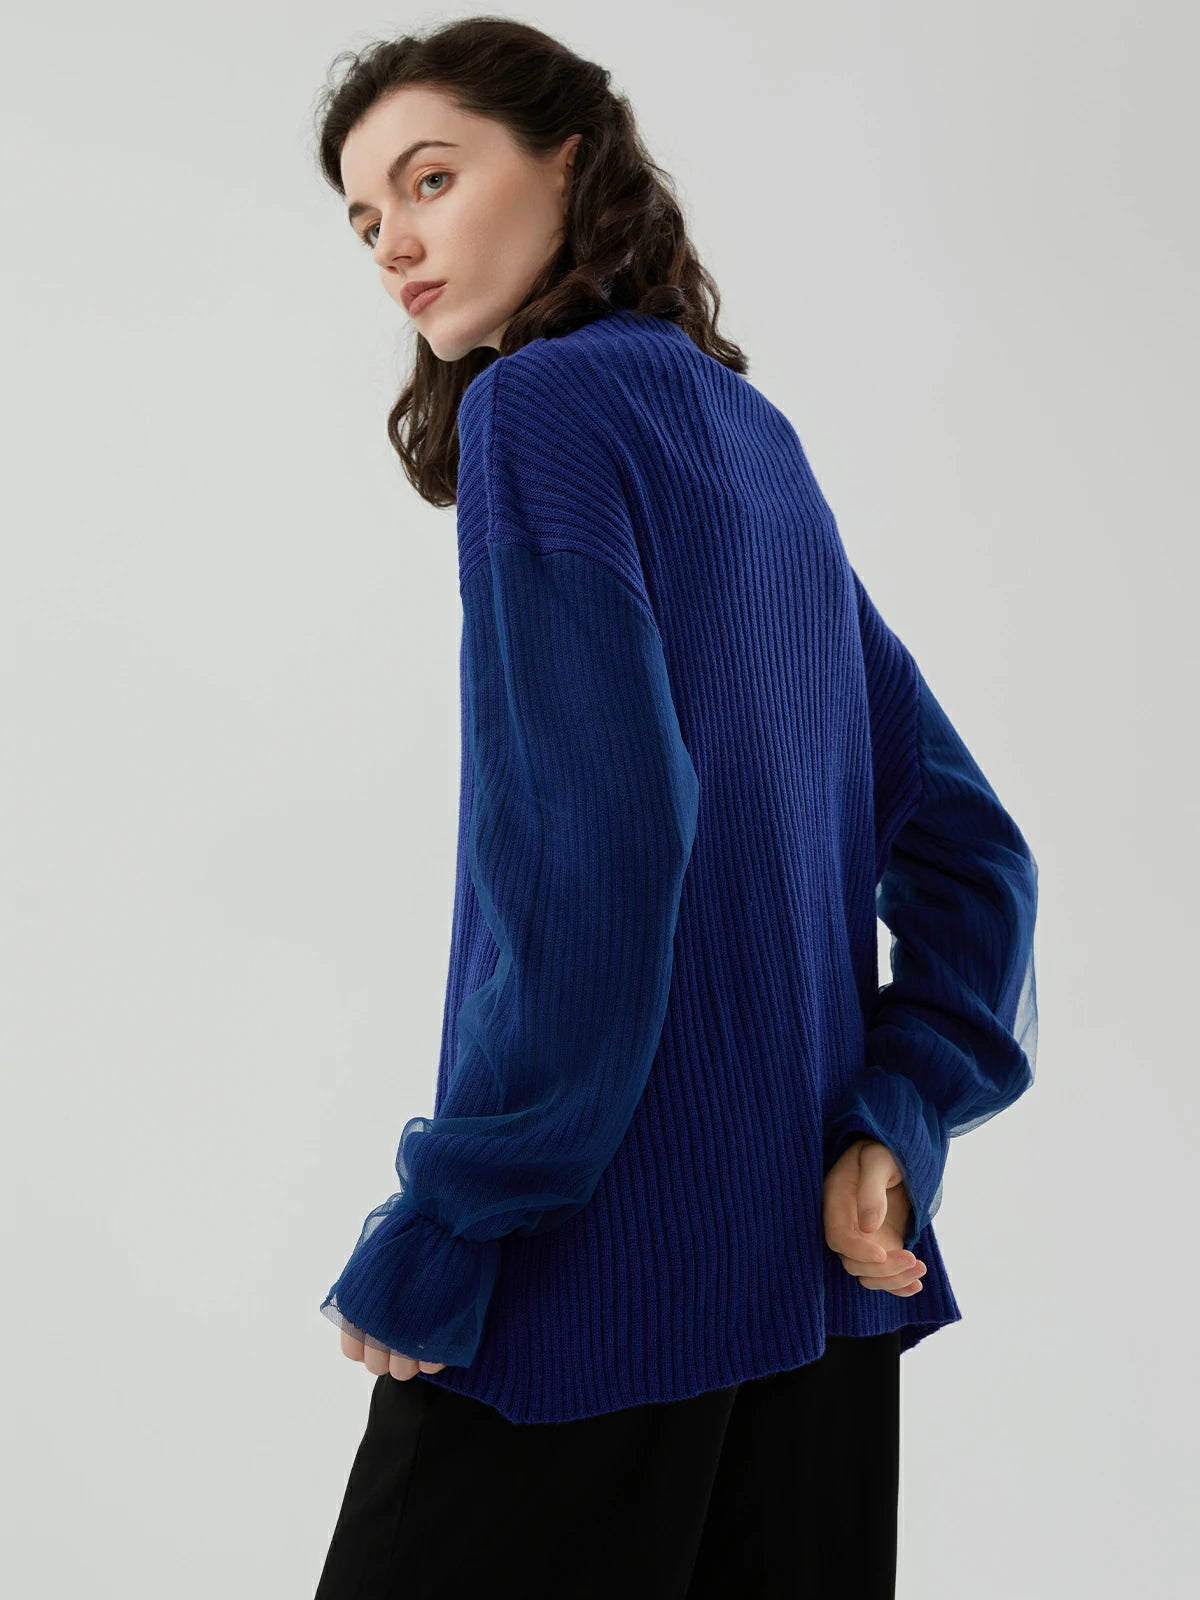 Sophisticated high-neck sweater with unique mesh sleeve design